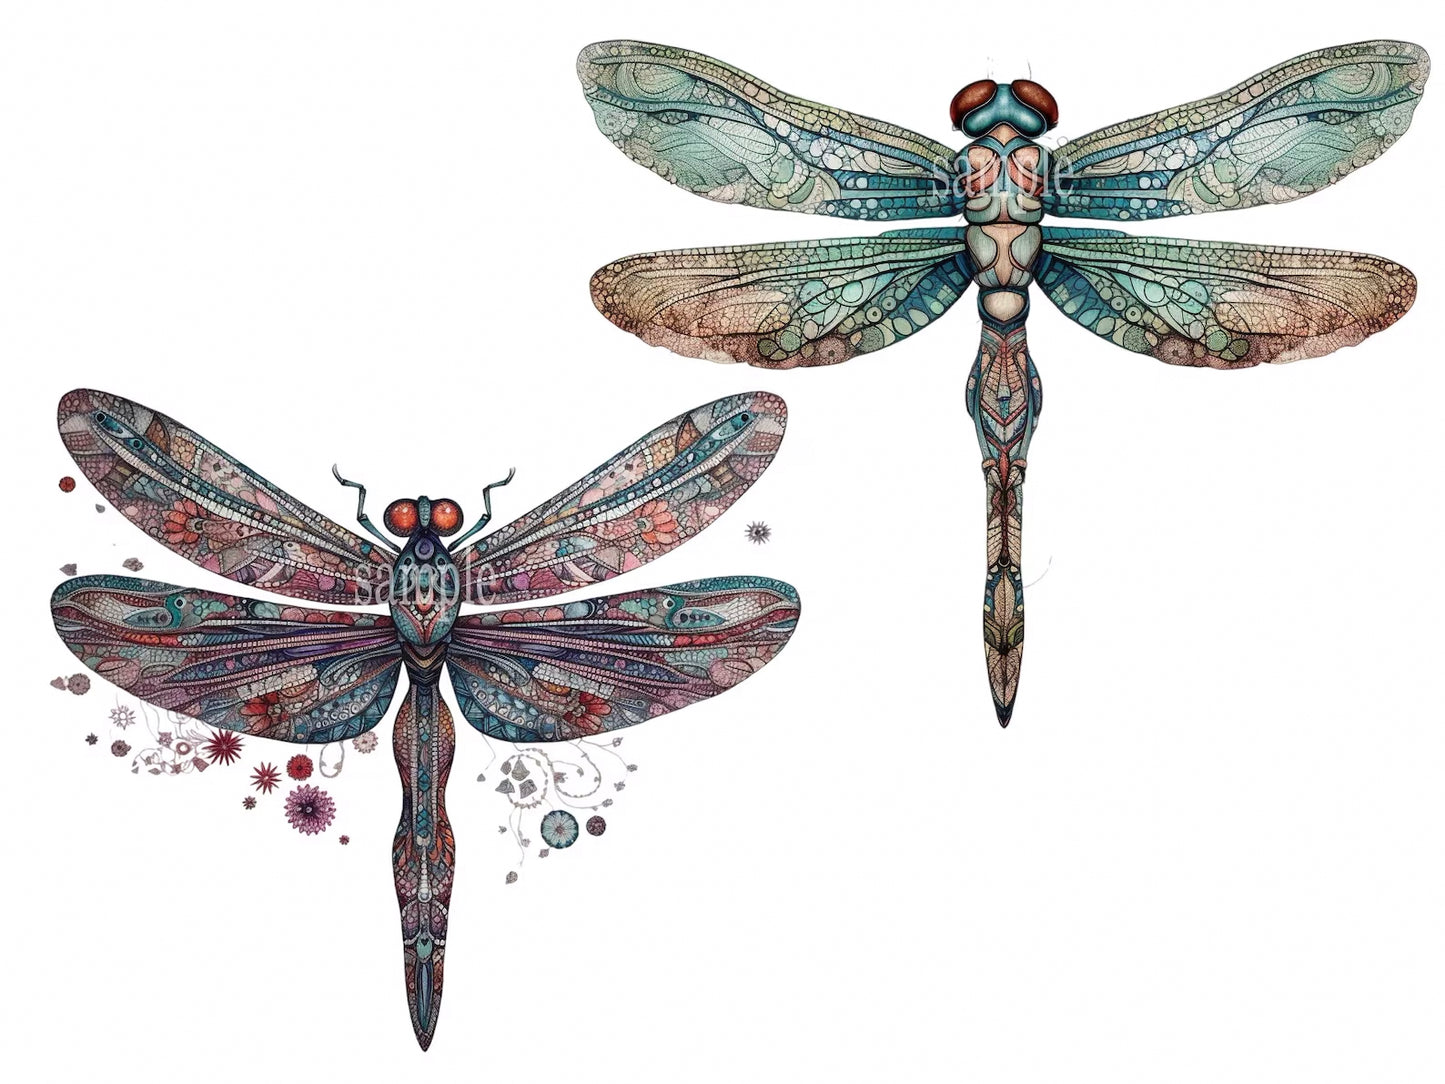 Ornate Dragonfly Graphic Design Clipart